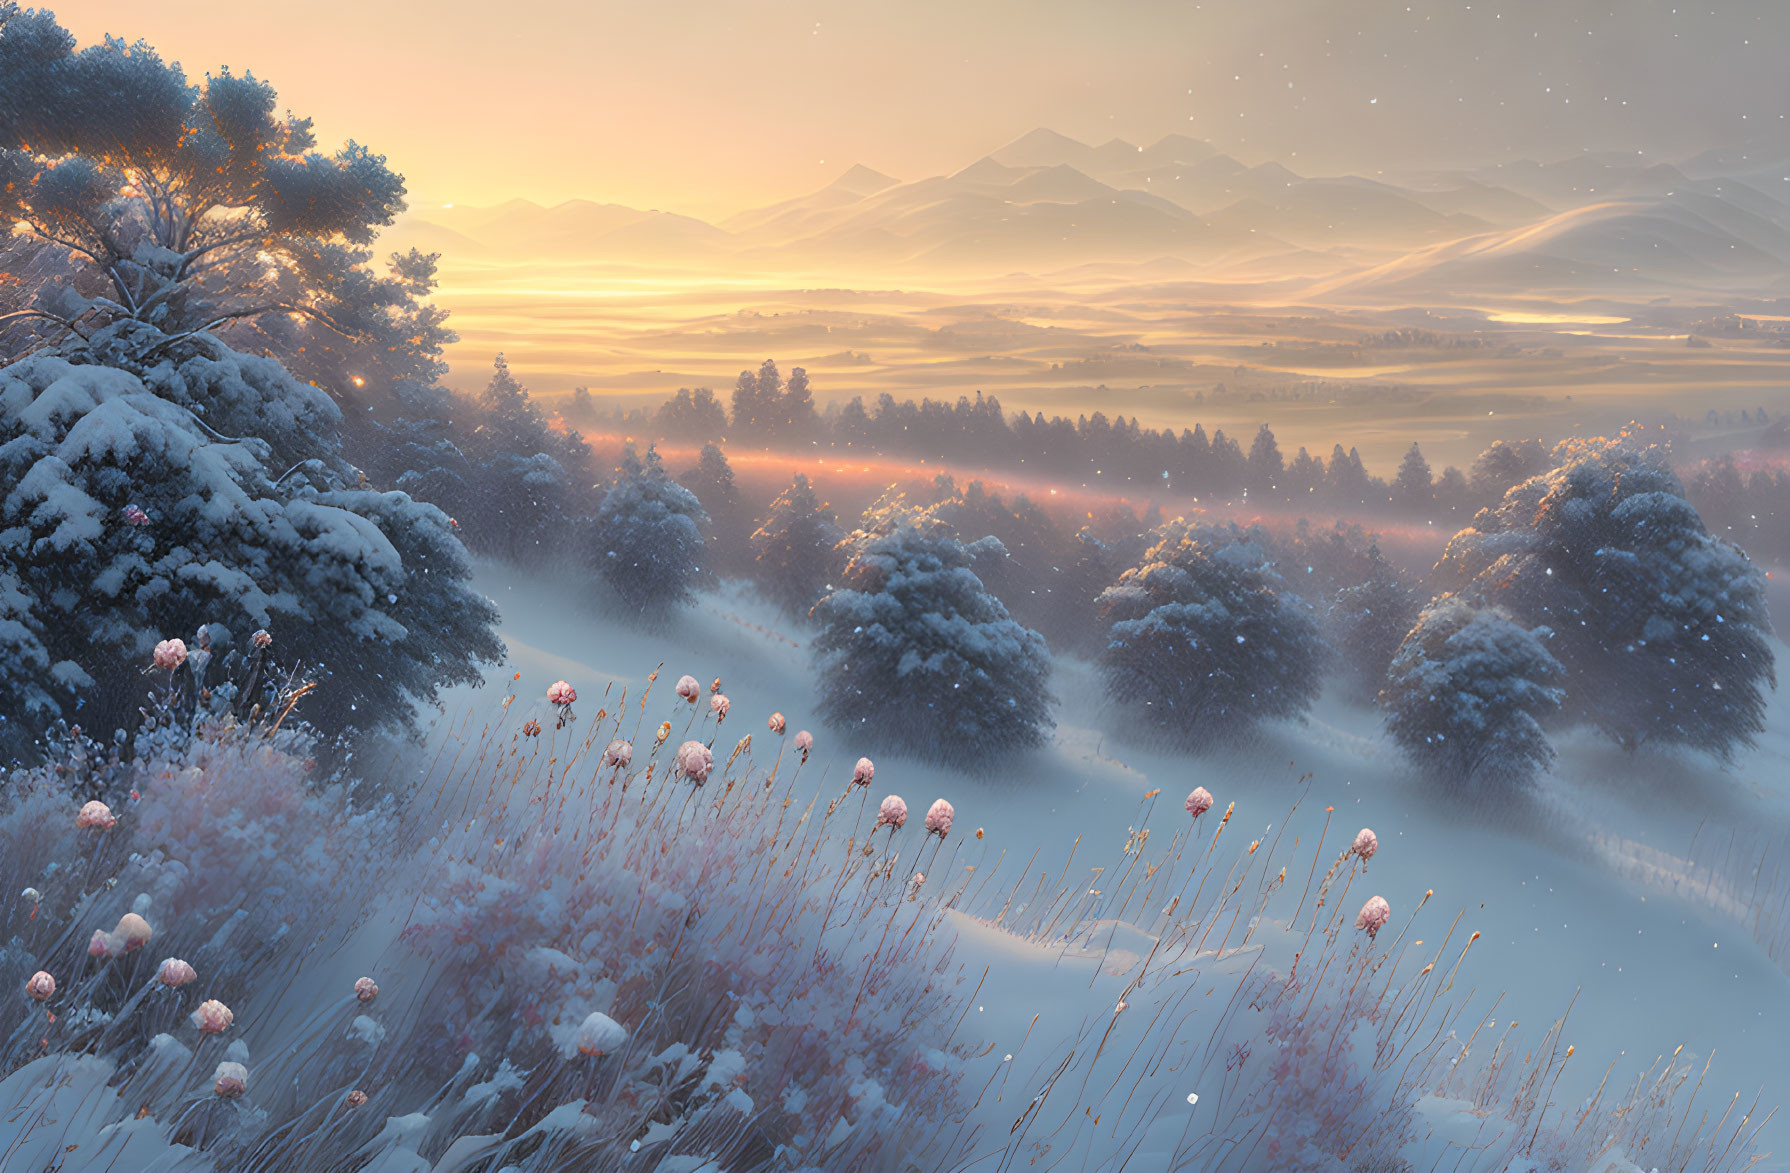 Snow-covered winter landscape at dawn with frosted plants and hills under softly lit sky